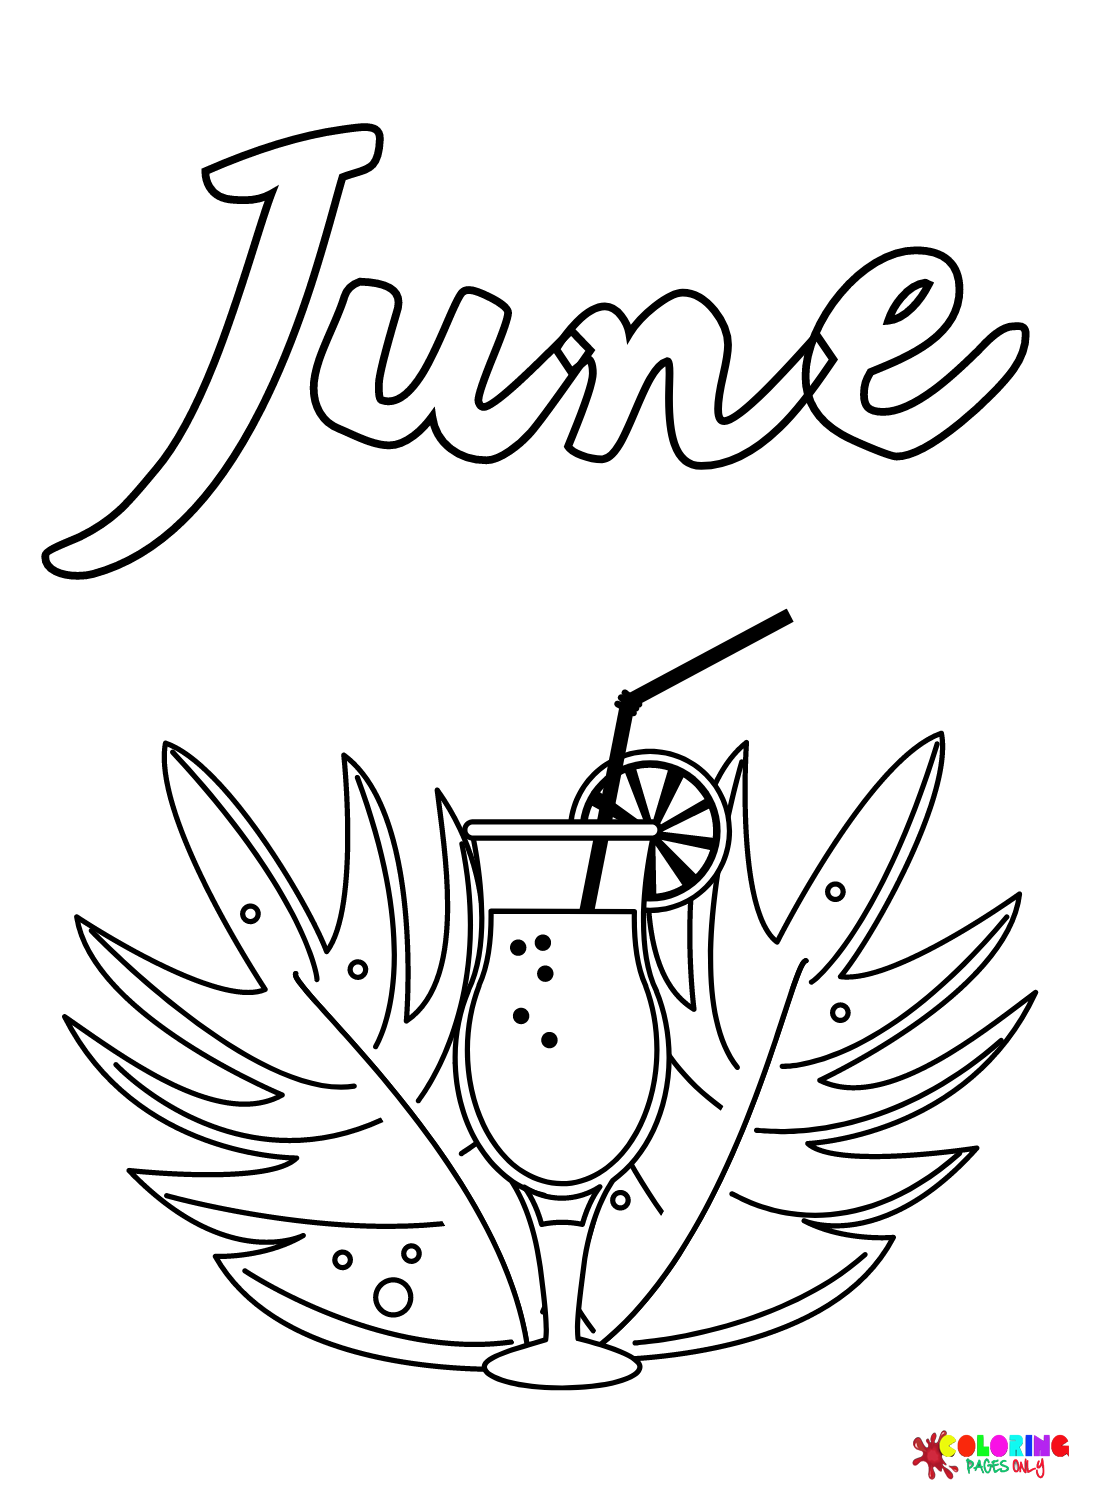 Relax June Coloring Page